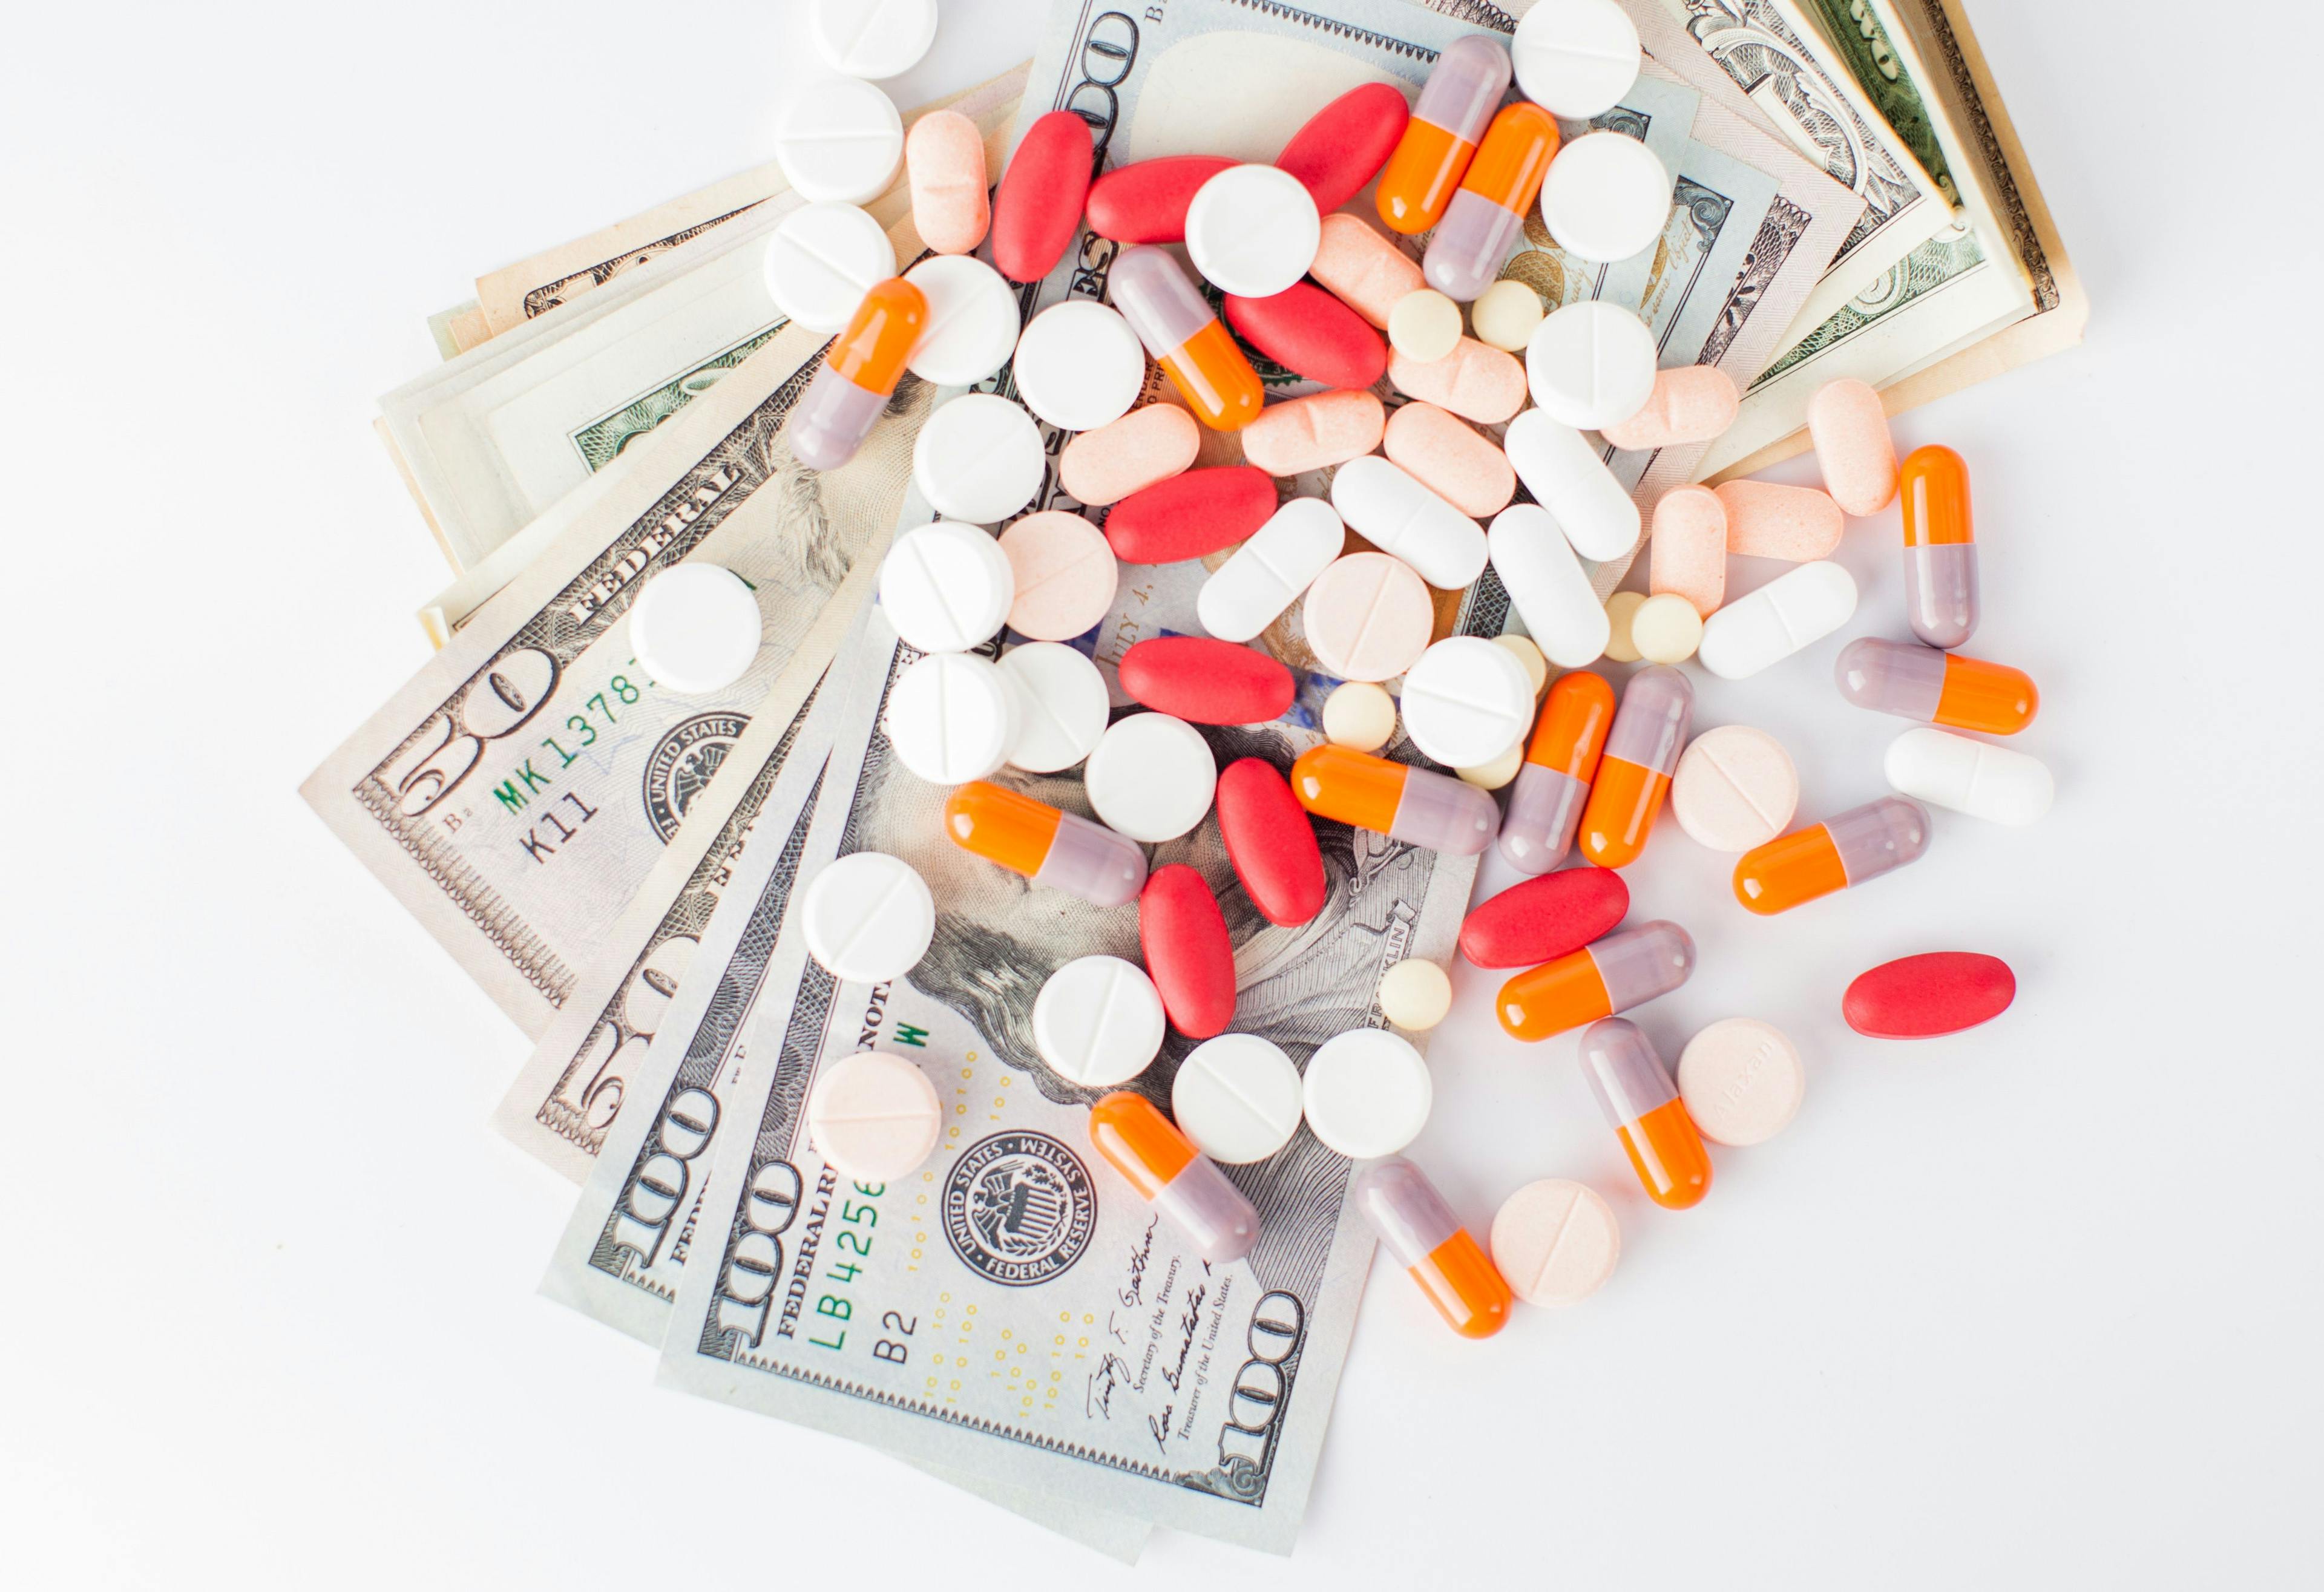 Help Remove Barriers to Cost-Related Nonadherence